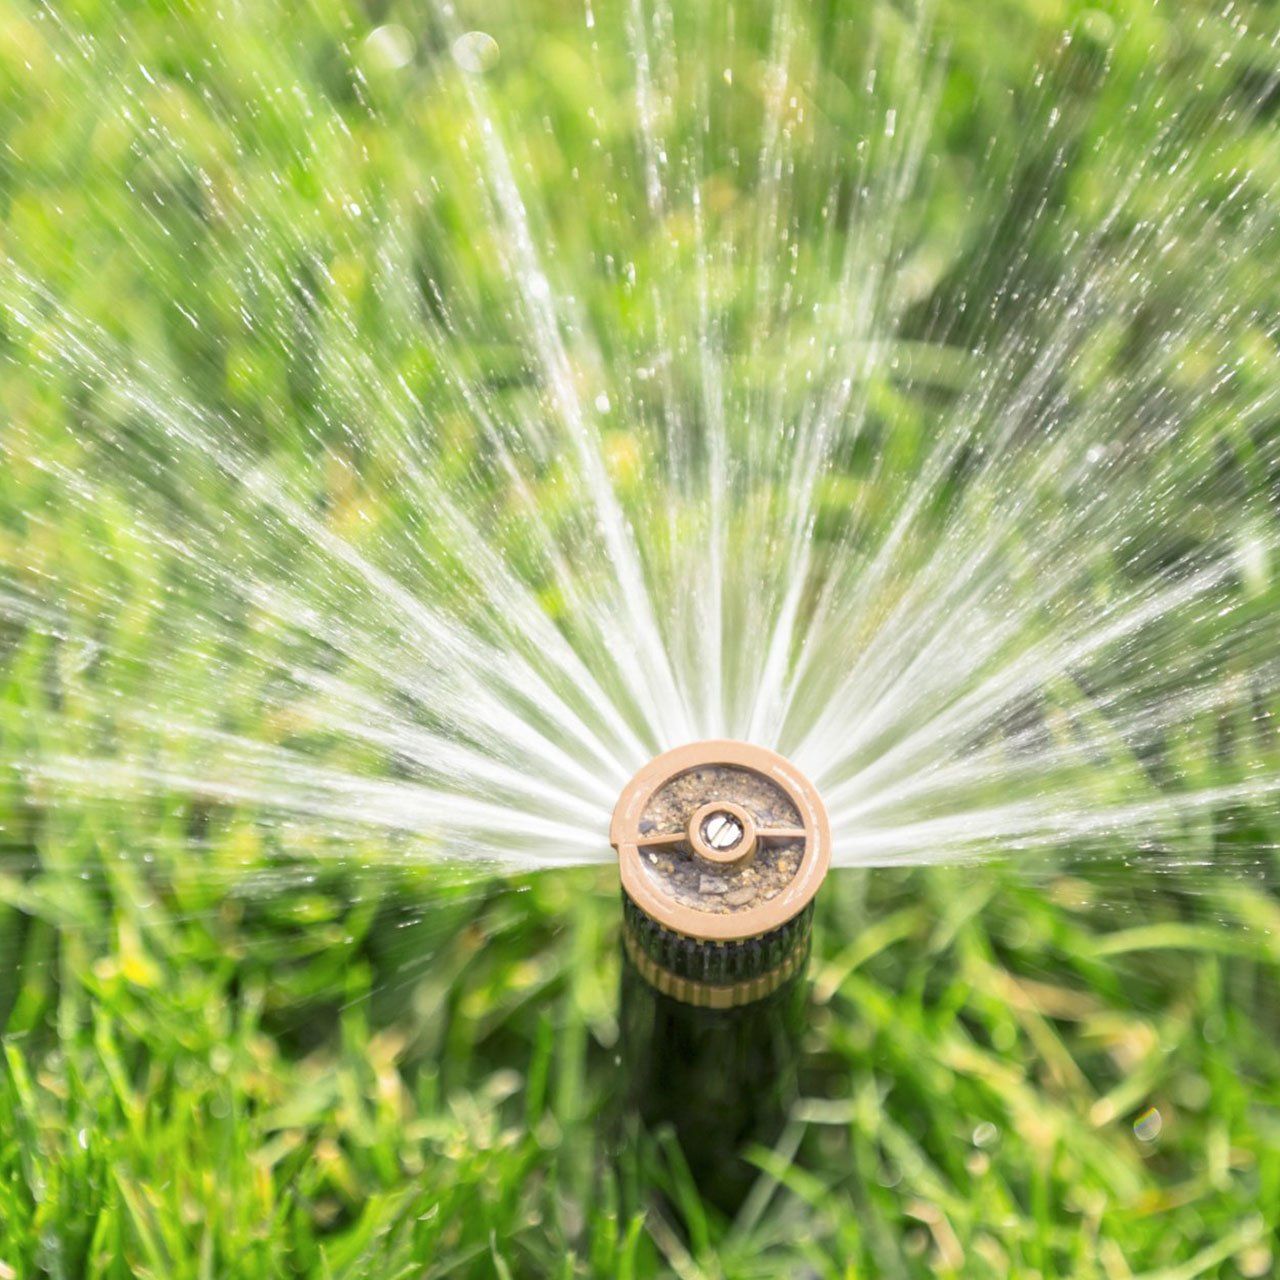 Automatic Sprinkler Watering Fresh Lawn — Ruffin, SC — Lane’s Well & Septic